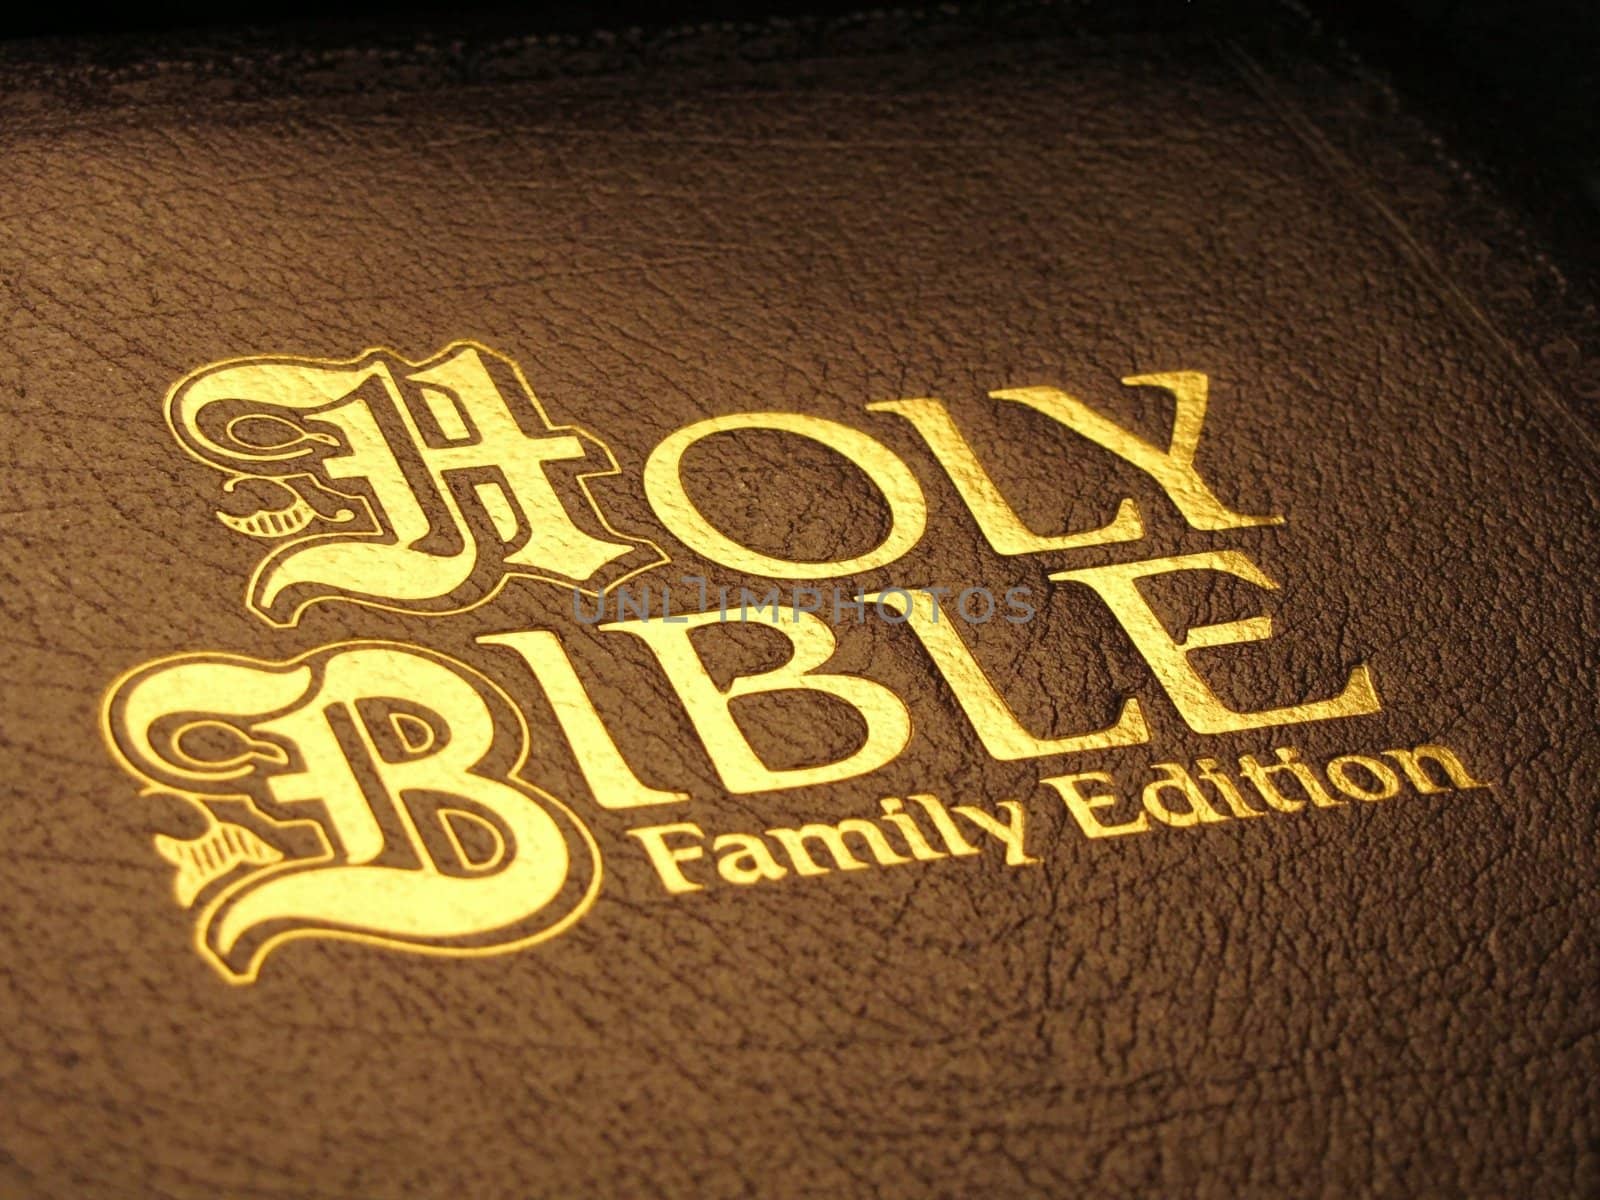 brown Holy Bible Family Edition with golden lettering